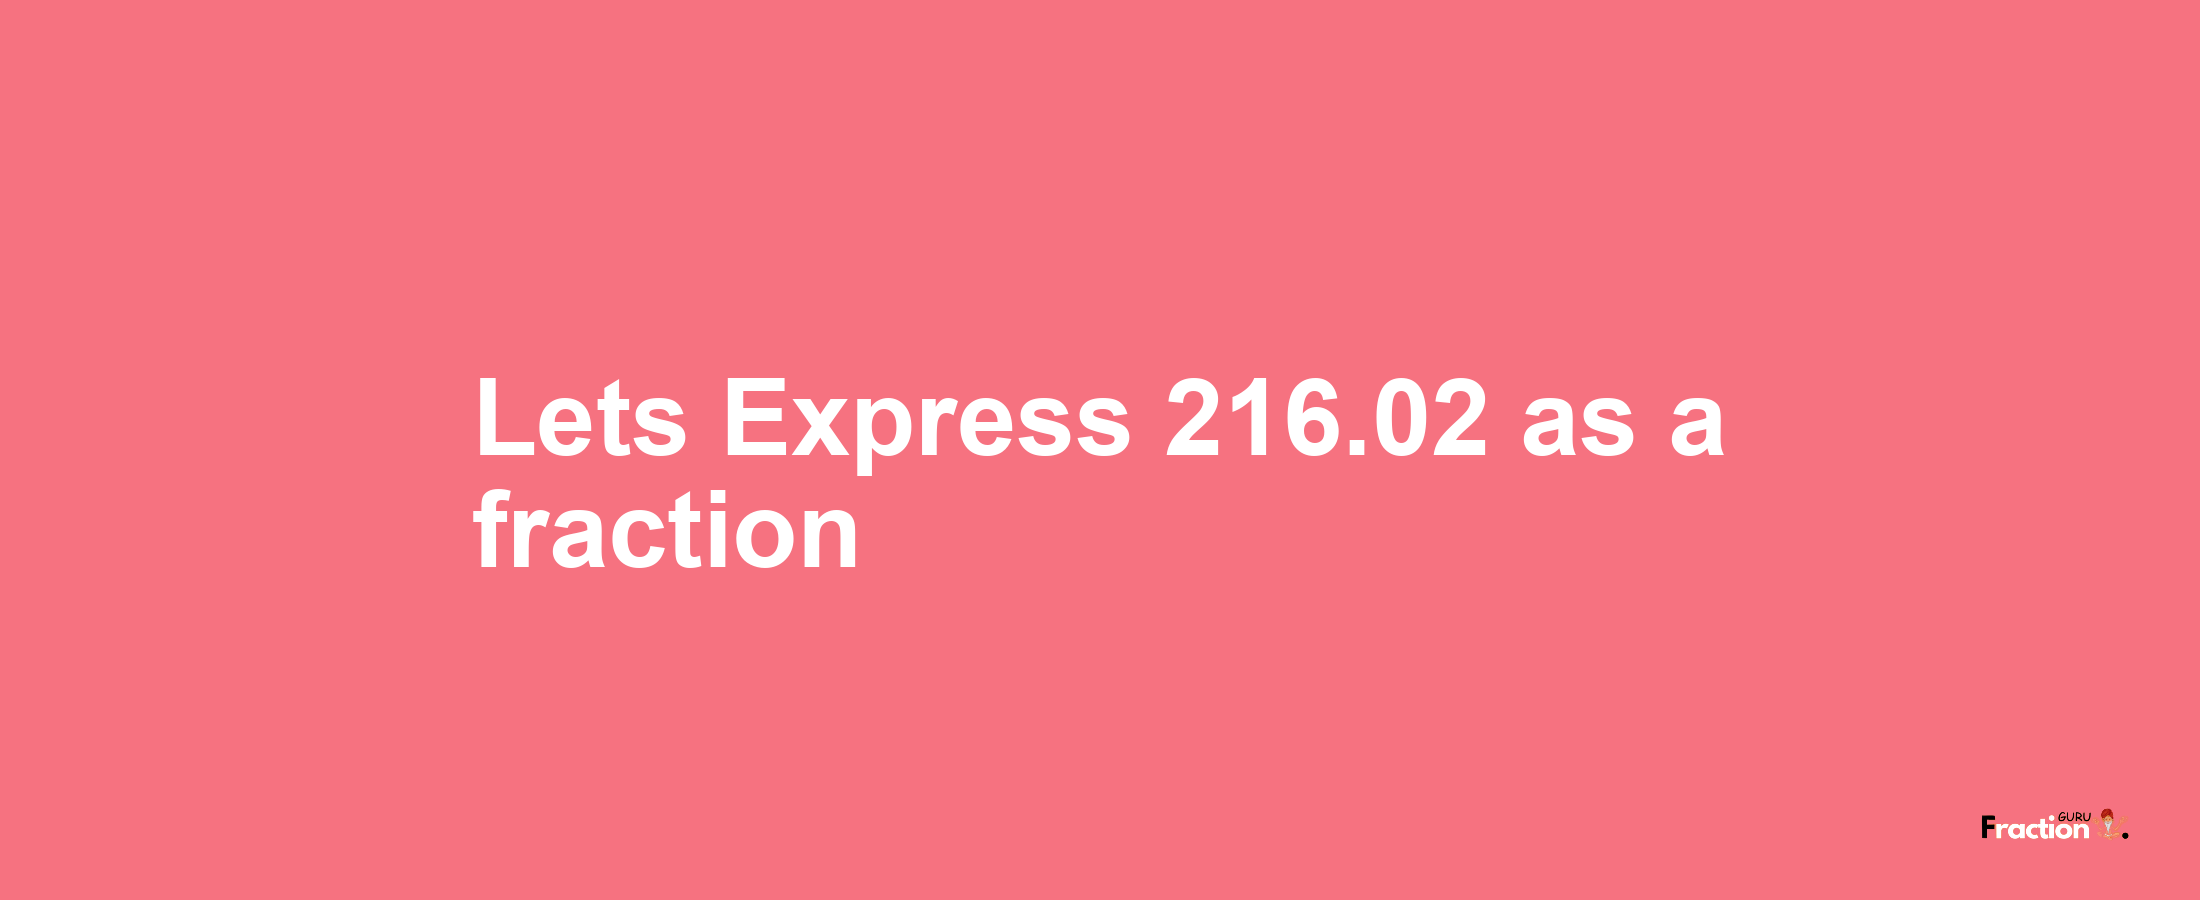 Lets Express 216.02 as afraction